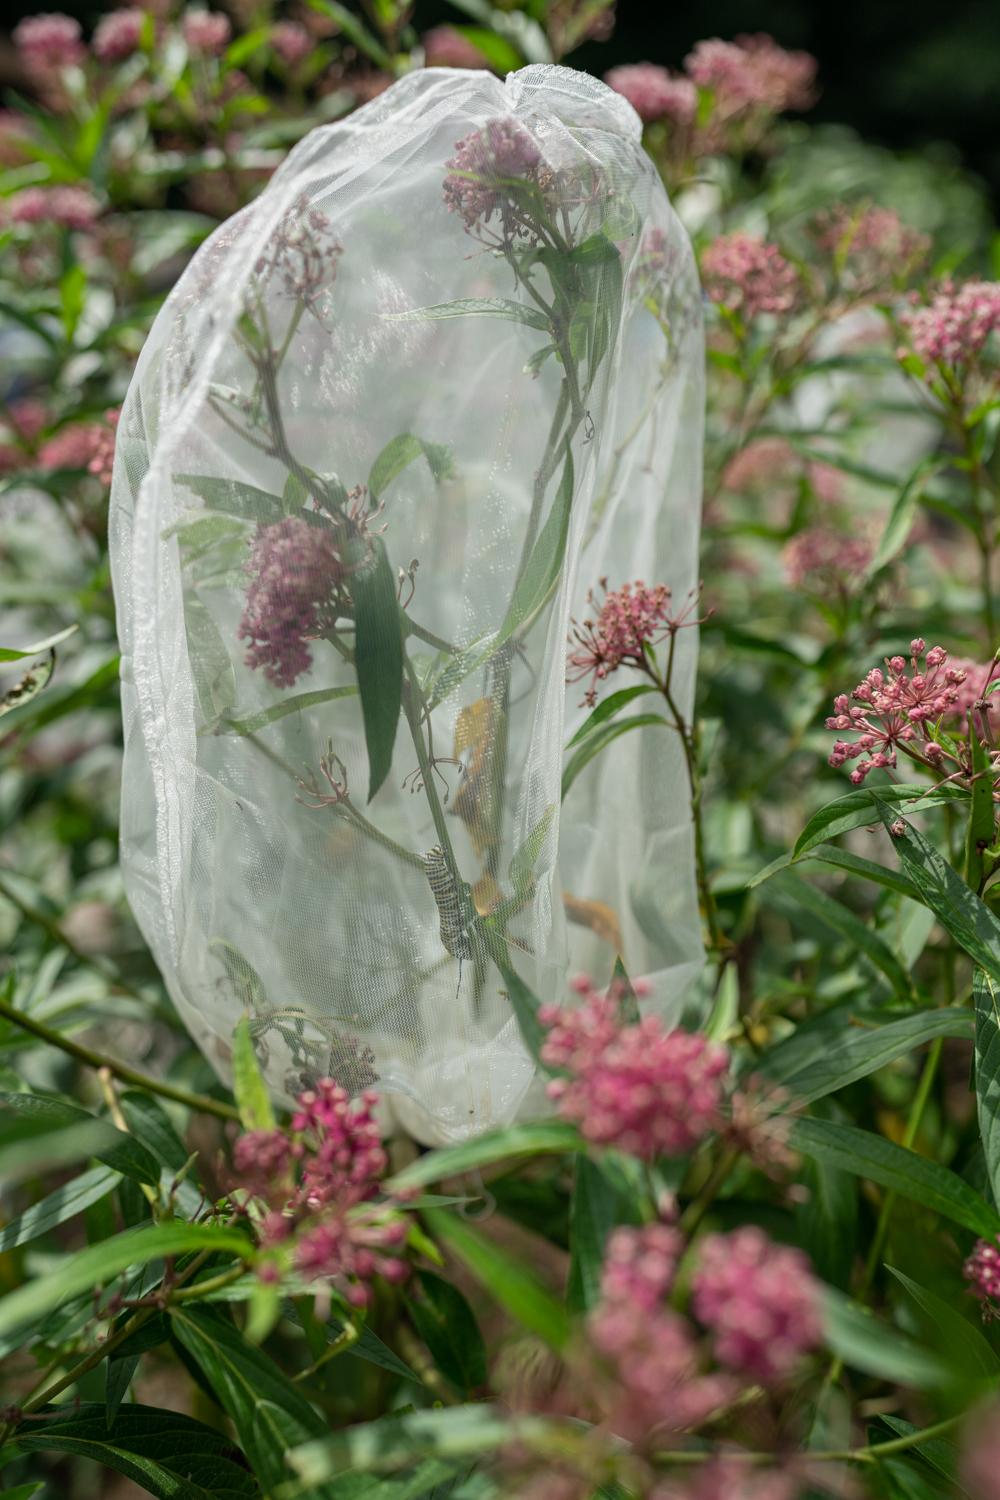 I Will See You Tomorrow  - Butterfly milkweed is contained in a net to prevent...